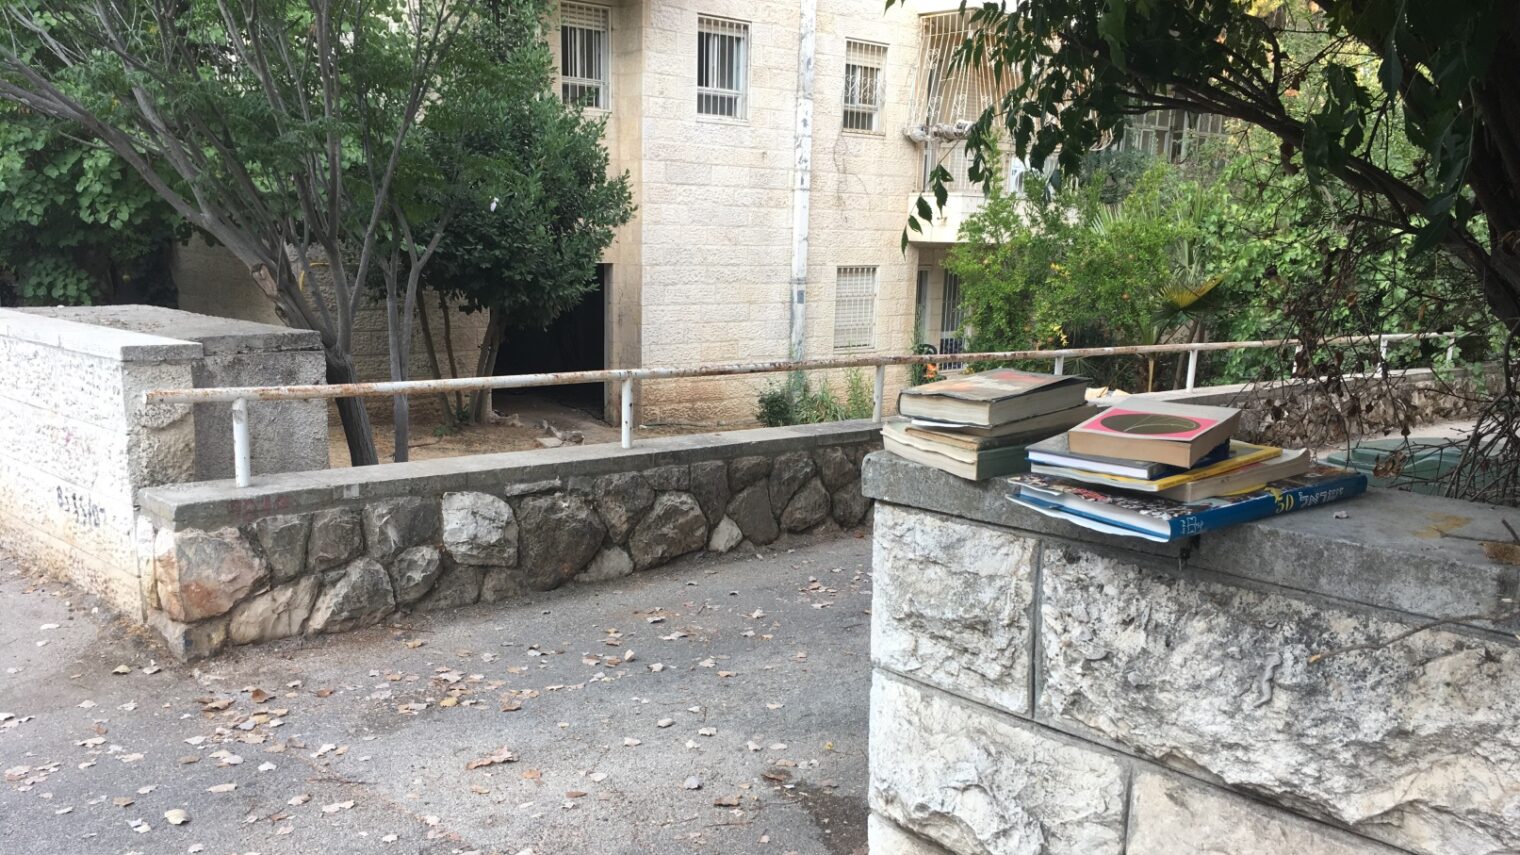 Books left on a wall in Jerusalem for anyone to take. Photo by Rachel Neiman